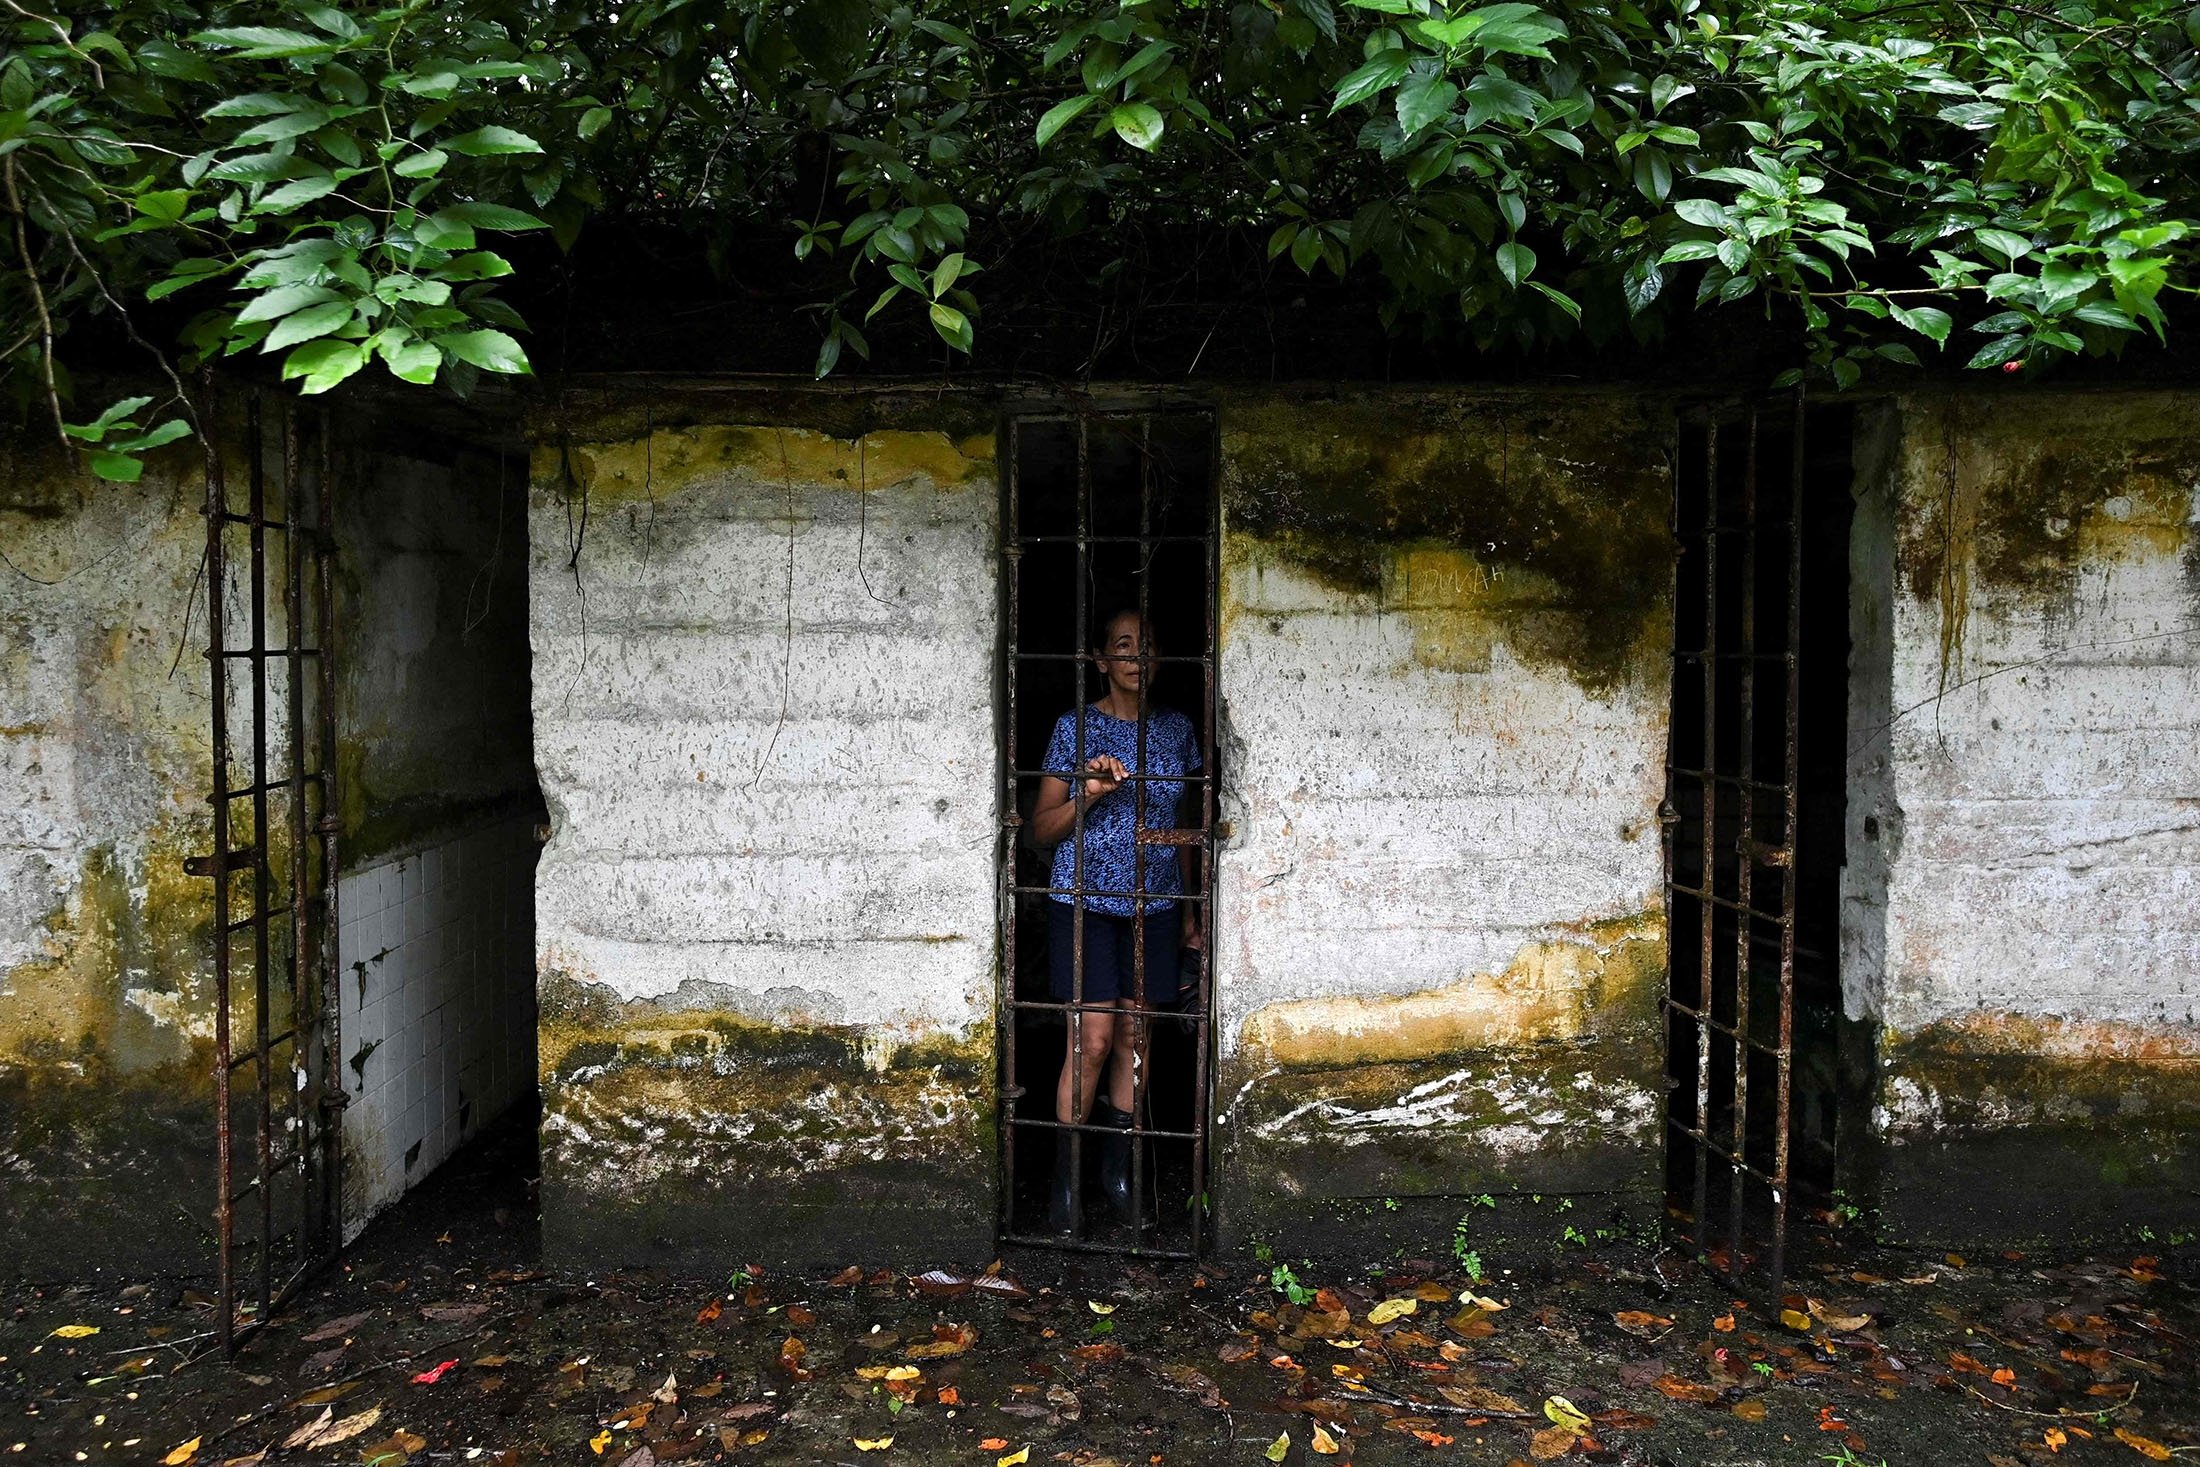 A tourist poses for a picture inside a cell at what was the prison at Gorgona Island, in the Pacific Ocean, off southwestern Colombia, Dec. 2, 2021. (AFP Photo)